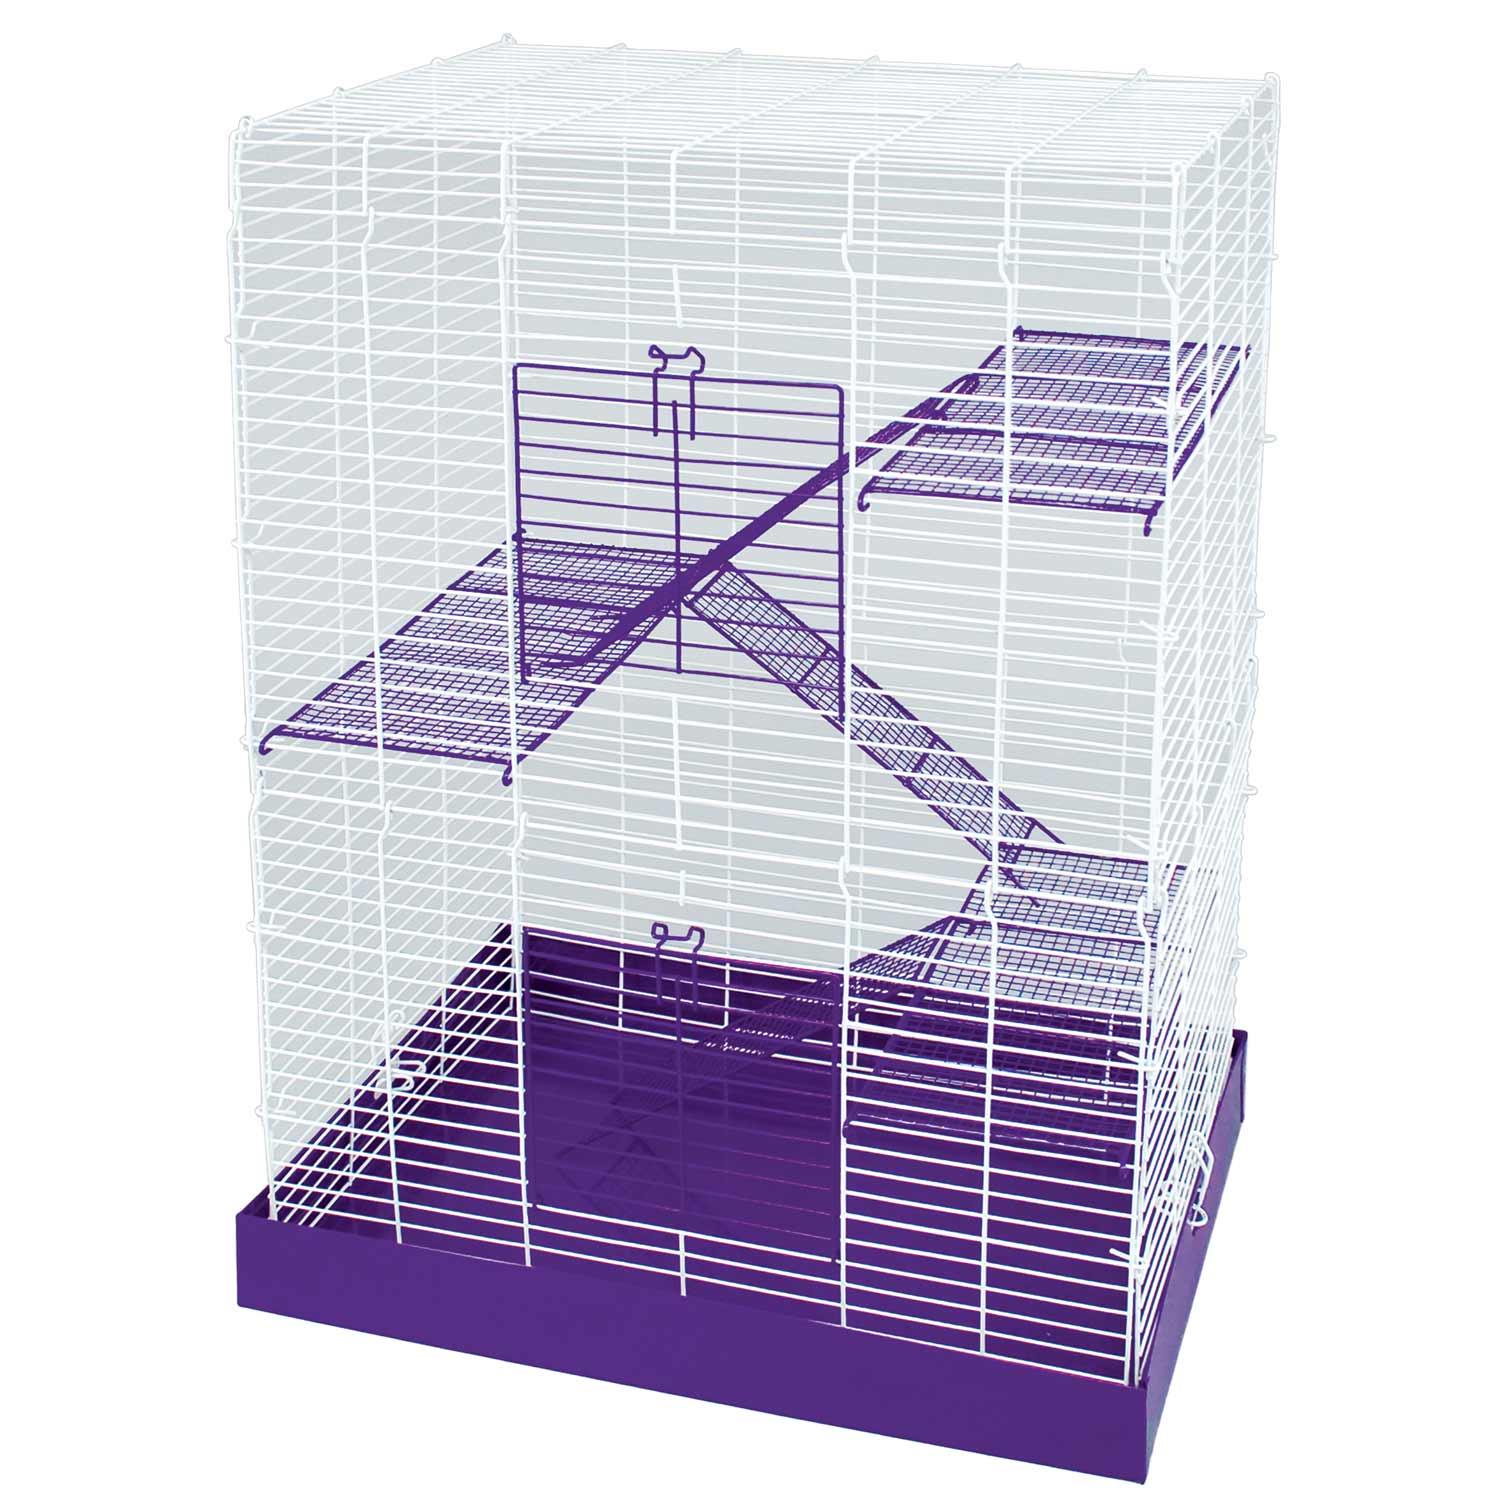 UPC 791611006634 product image for WARE Chew Proof Four Story Hamster Cage, 12.75 IN, Purple / White | upcitemdb.com